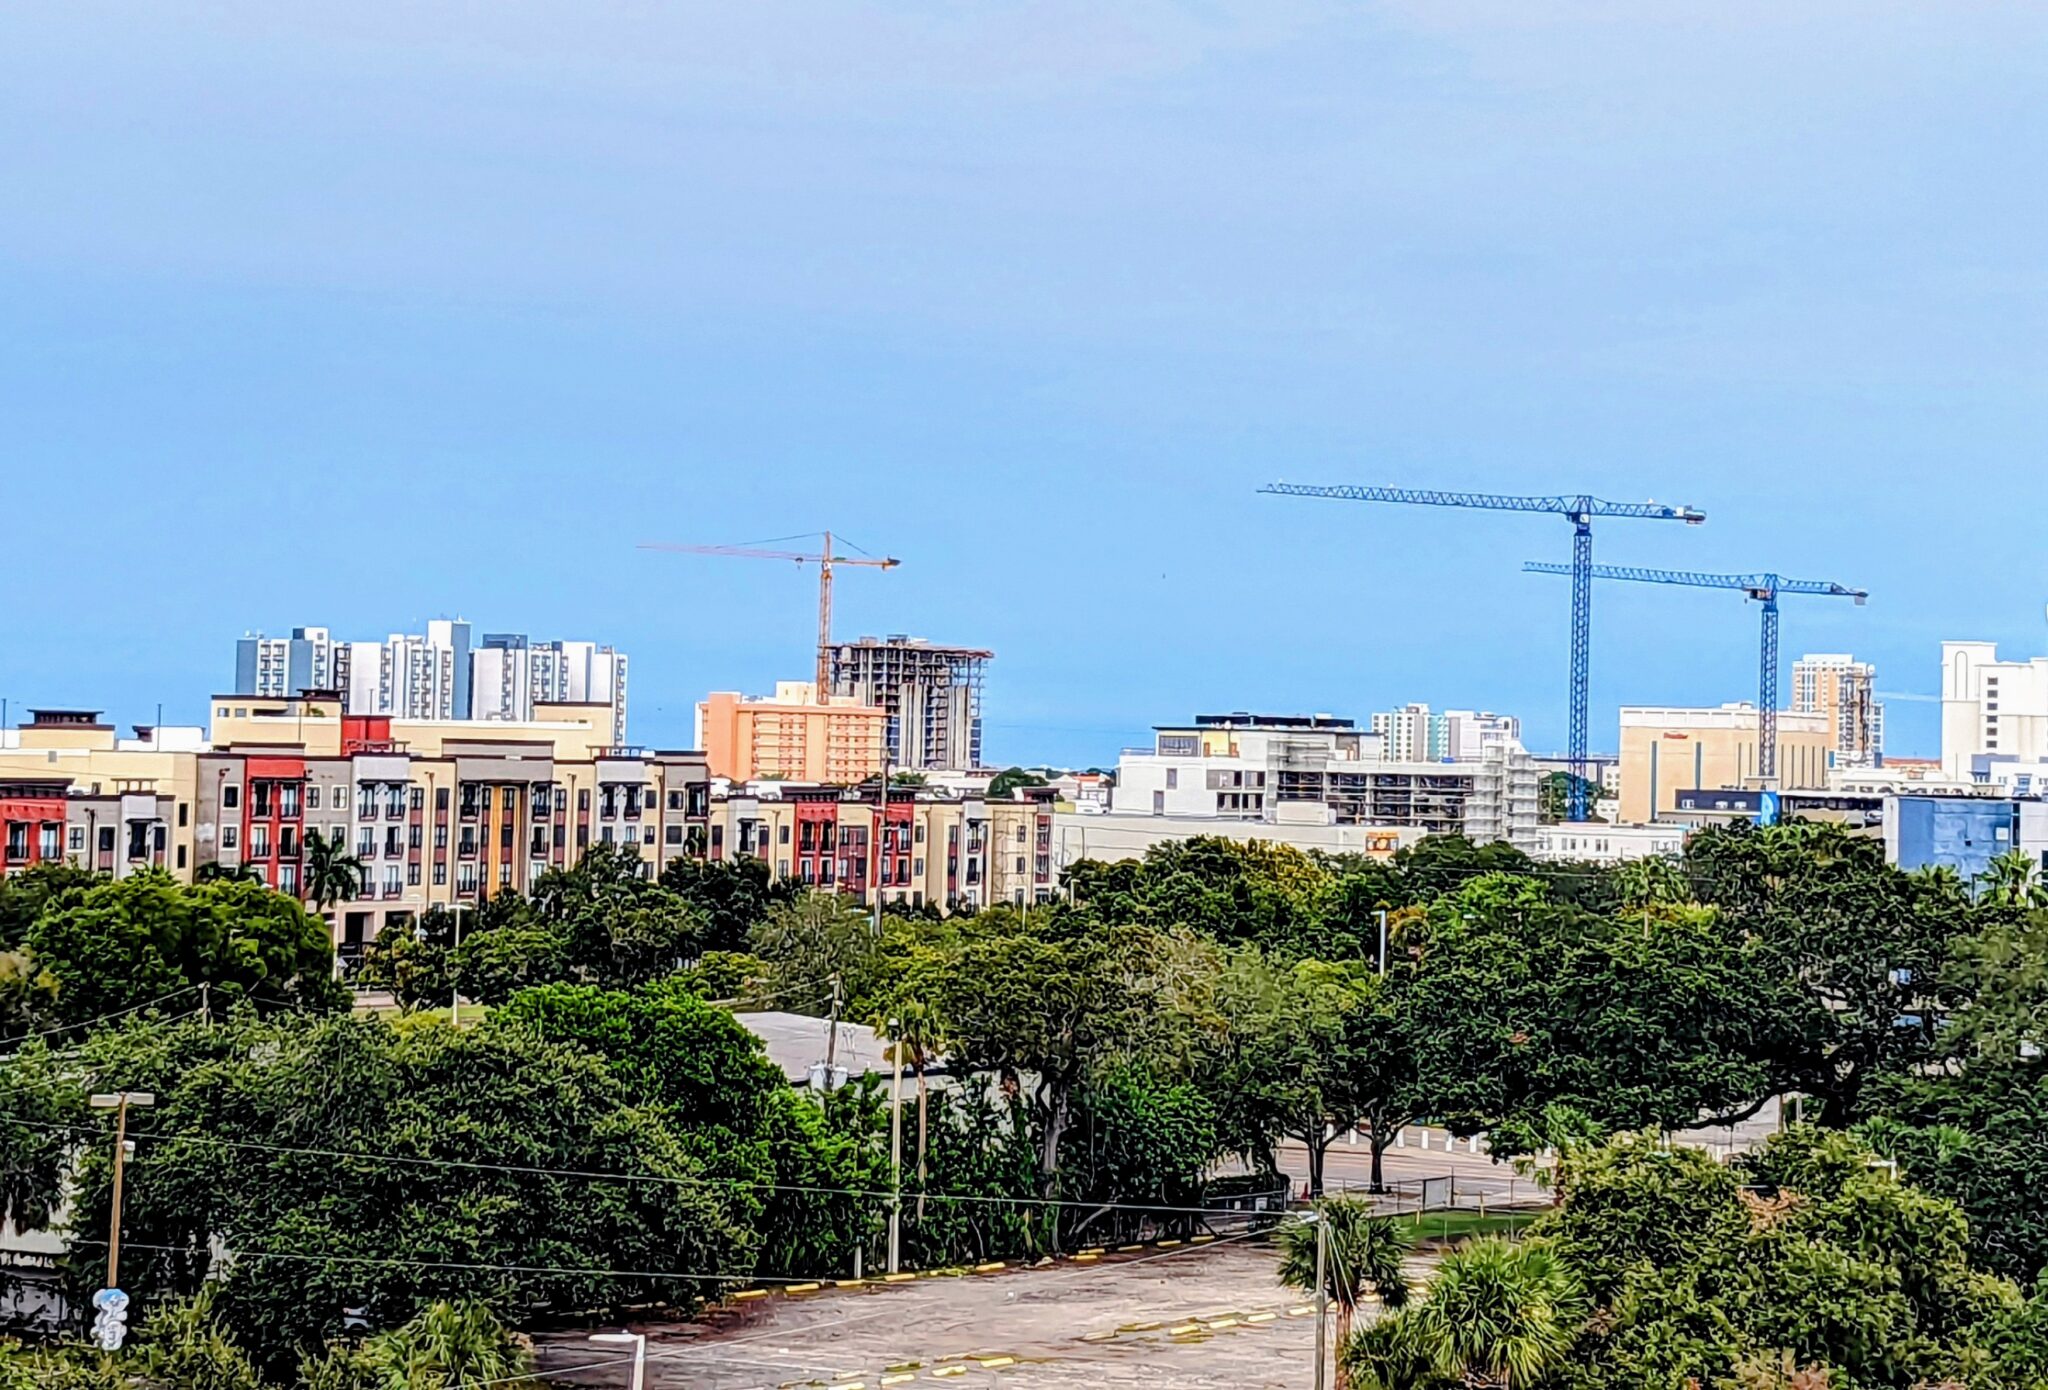 New condominiums continue rising above downtown St. Petersburg. A Tampa Bay Partnership study will measure the region's affordable and workforce housing stock and how it aligns with residents' needs. Photo by Mark Parker.